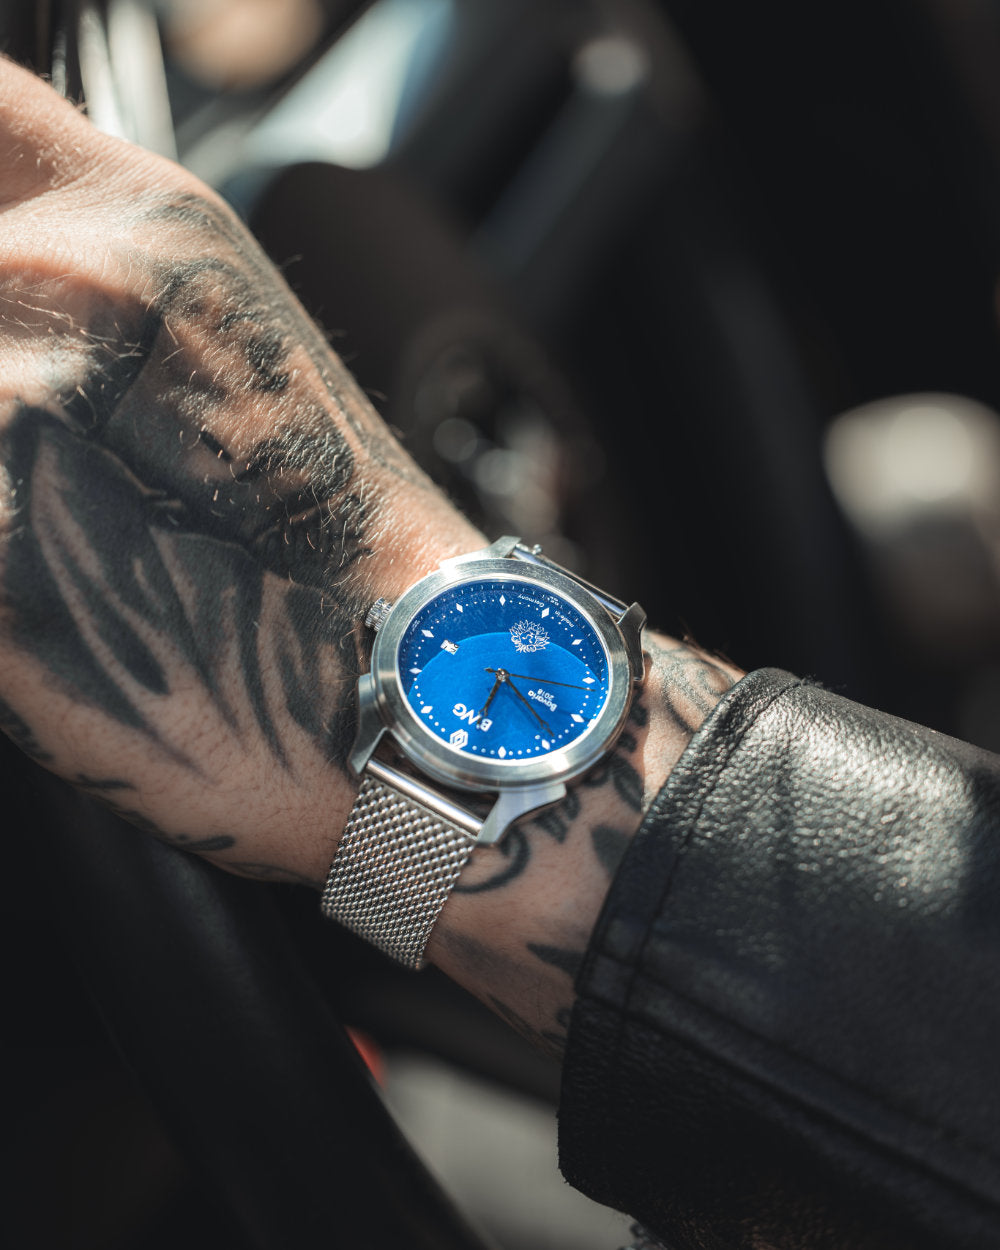 Man with tattooed hand wears a BWG Bavarian watch BAVARIA GOOD Design awarded Premium Quartz Watch with Swiss Ronda Movement driving a Mustang